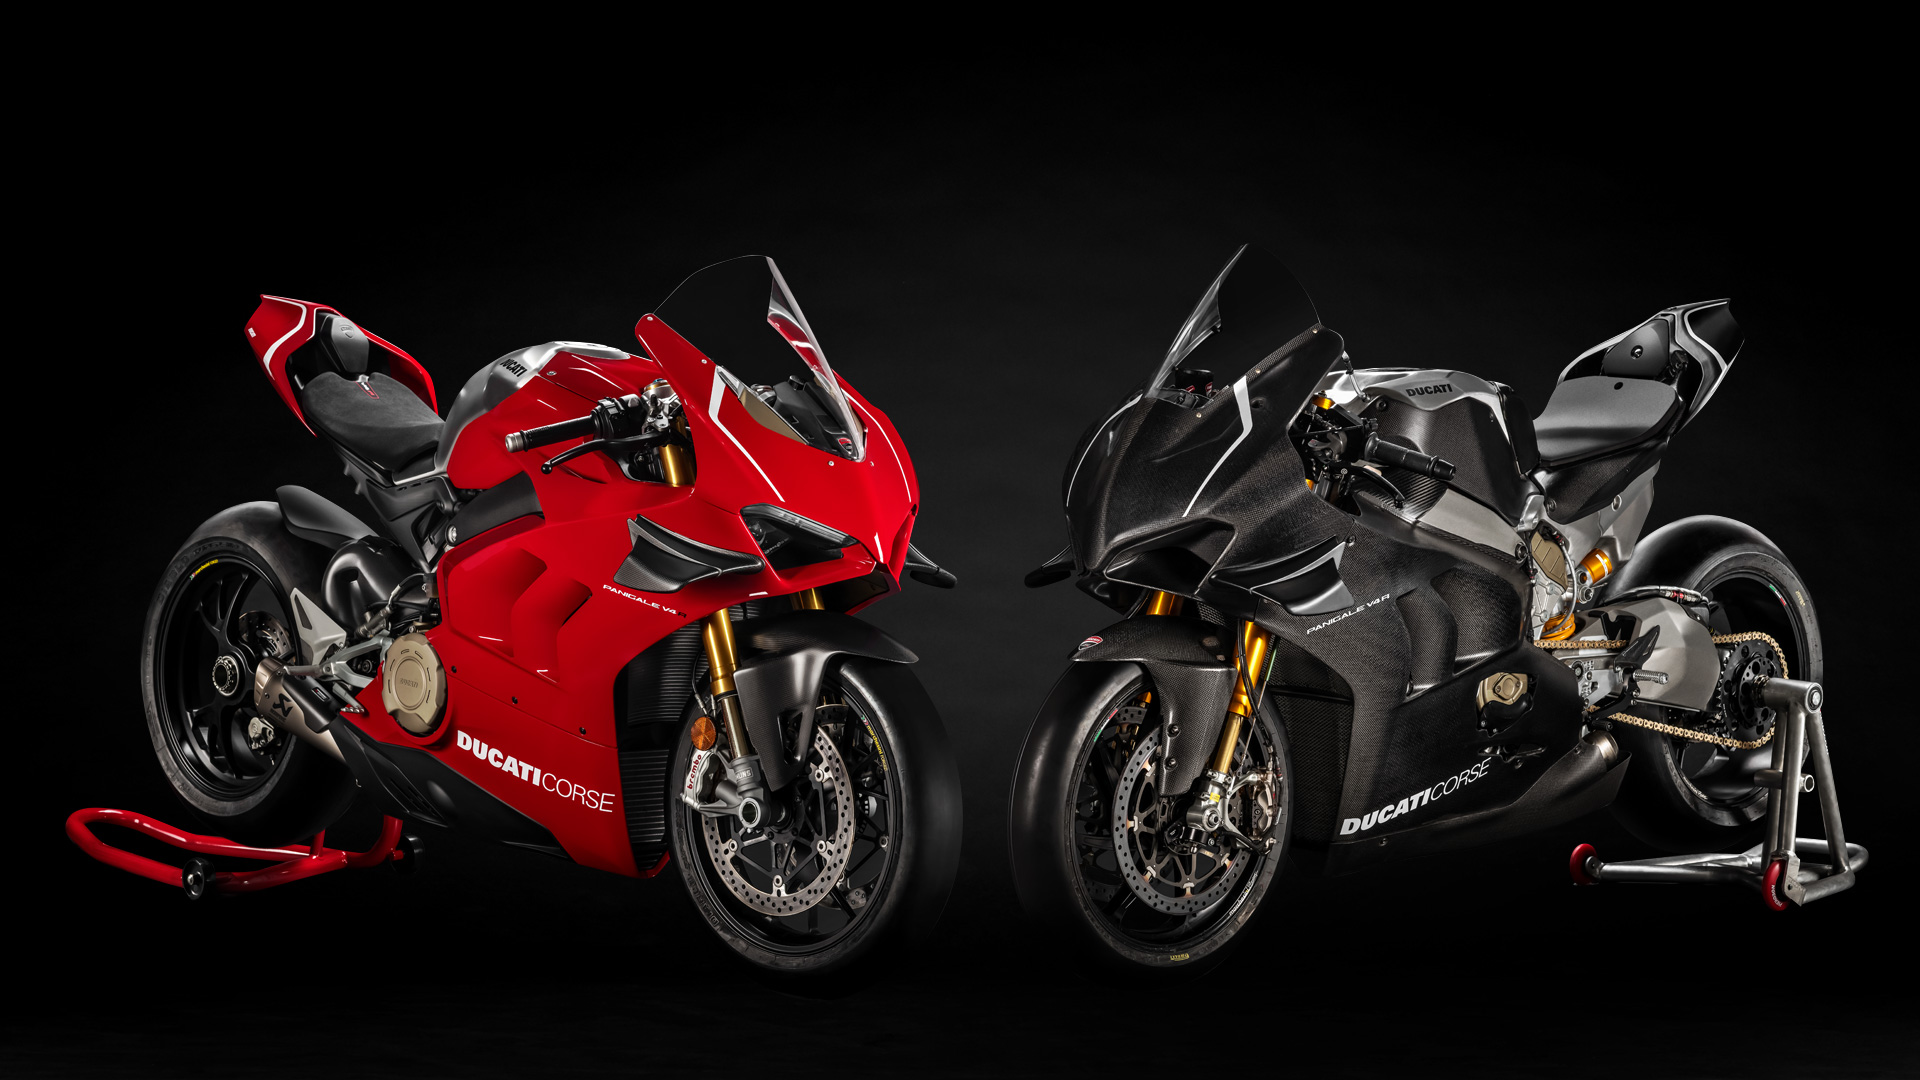 New Ducati Panigale V4 R Pure Racing Adrenaline